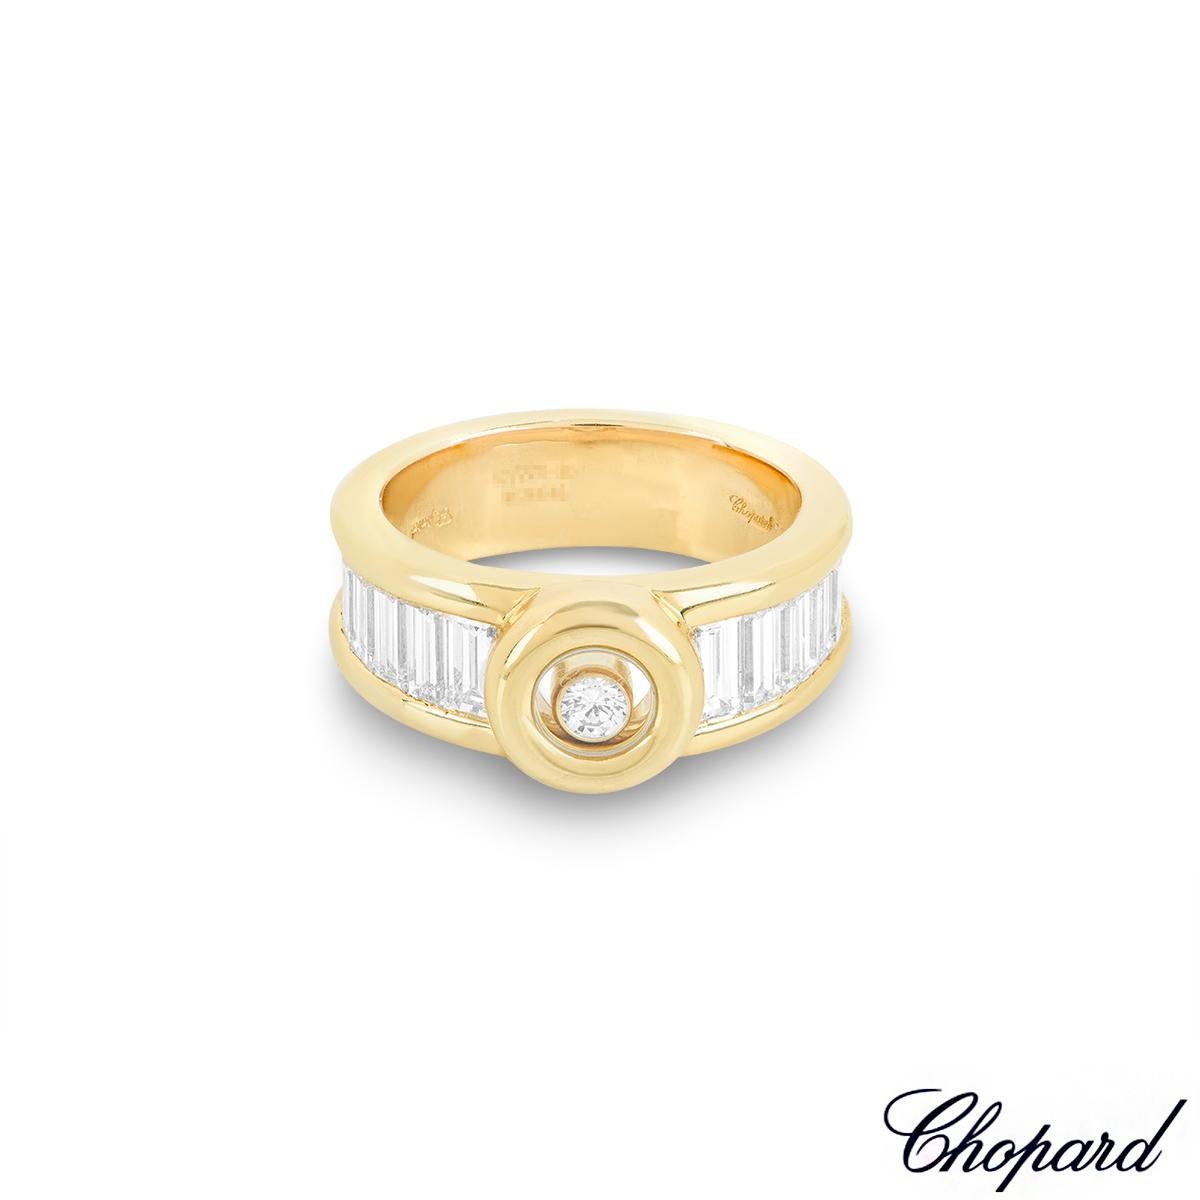 Emerald Cut Chopard Yellow Gold Happy Diamonds Ring 82/2211-0107 For Sale